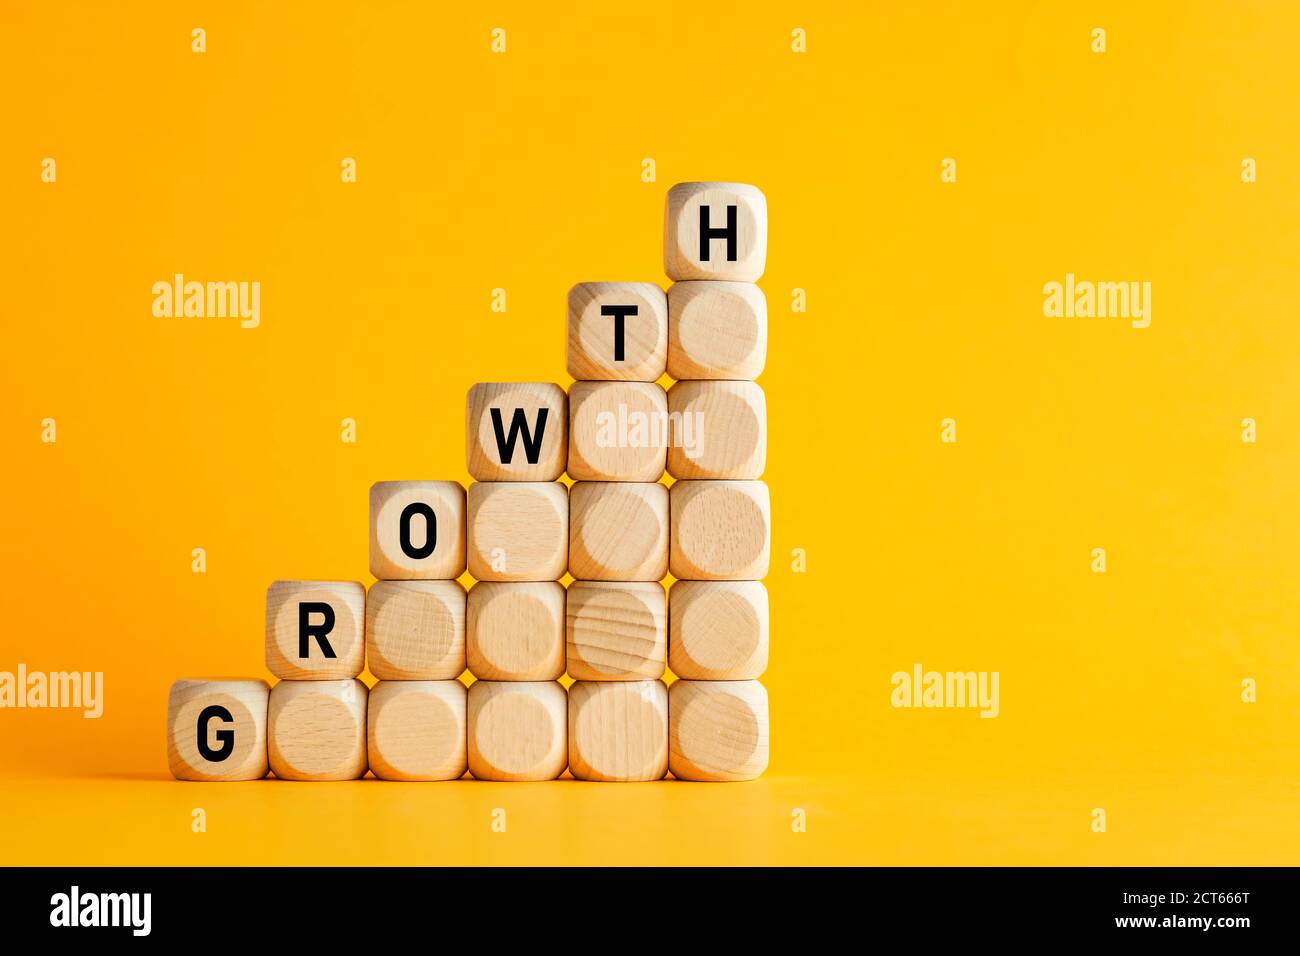 The word growth on stacked wooden cubes against yellow background. Financial or business growth concept. Stock Photo